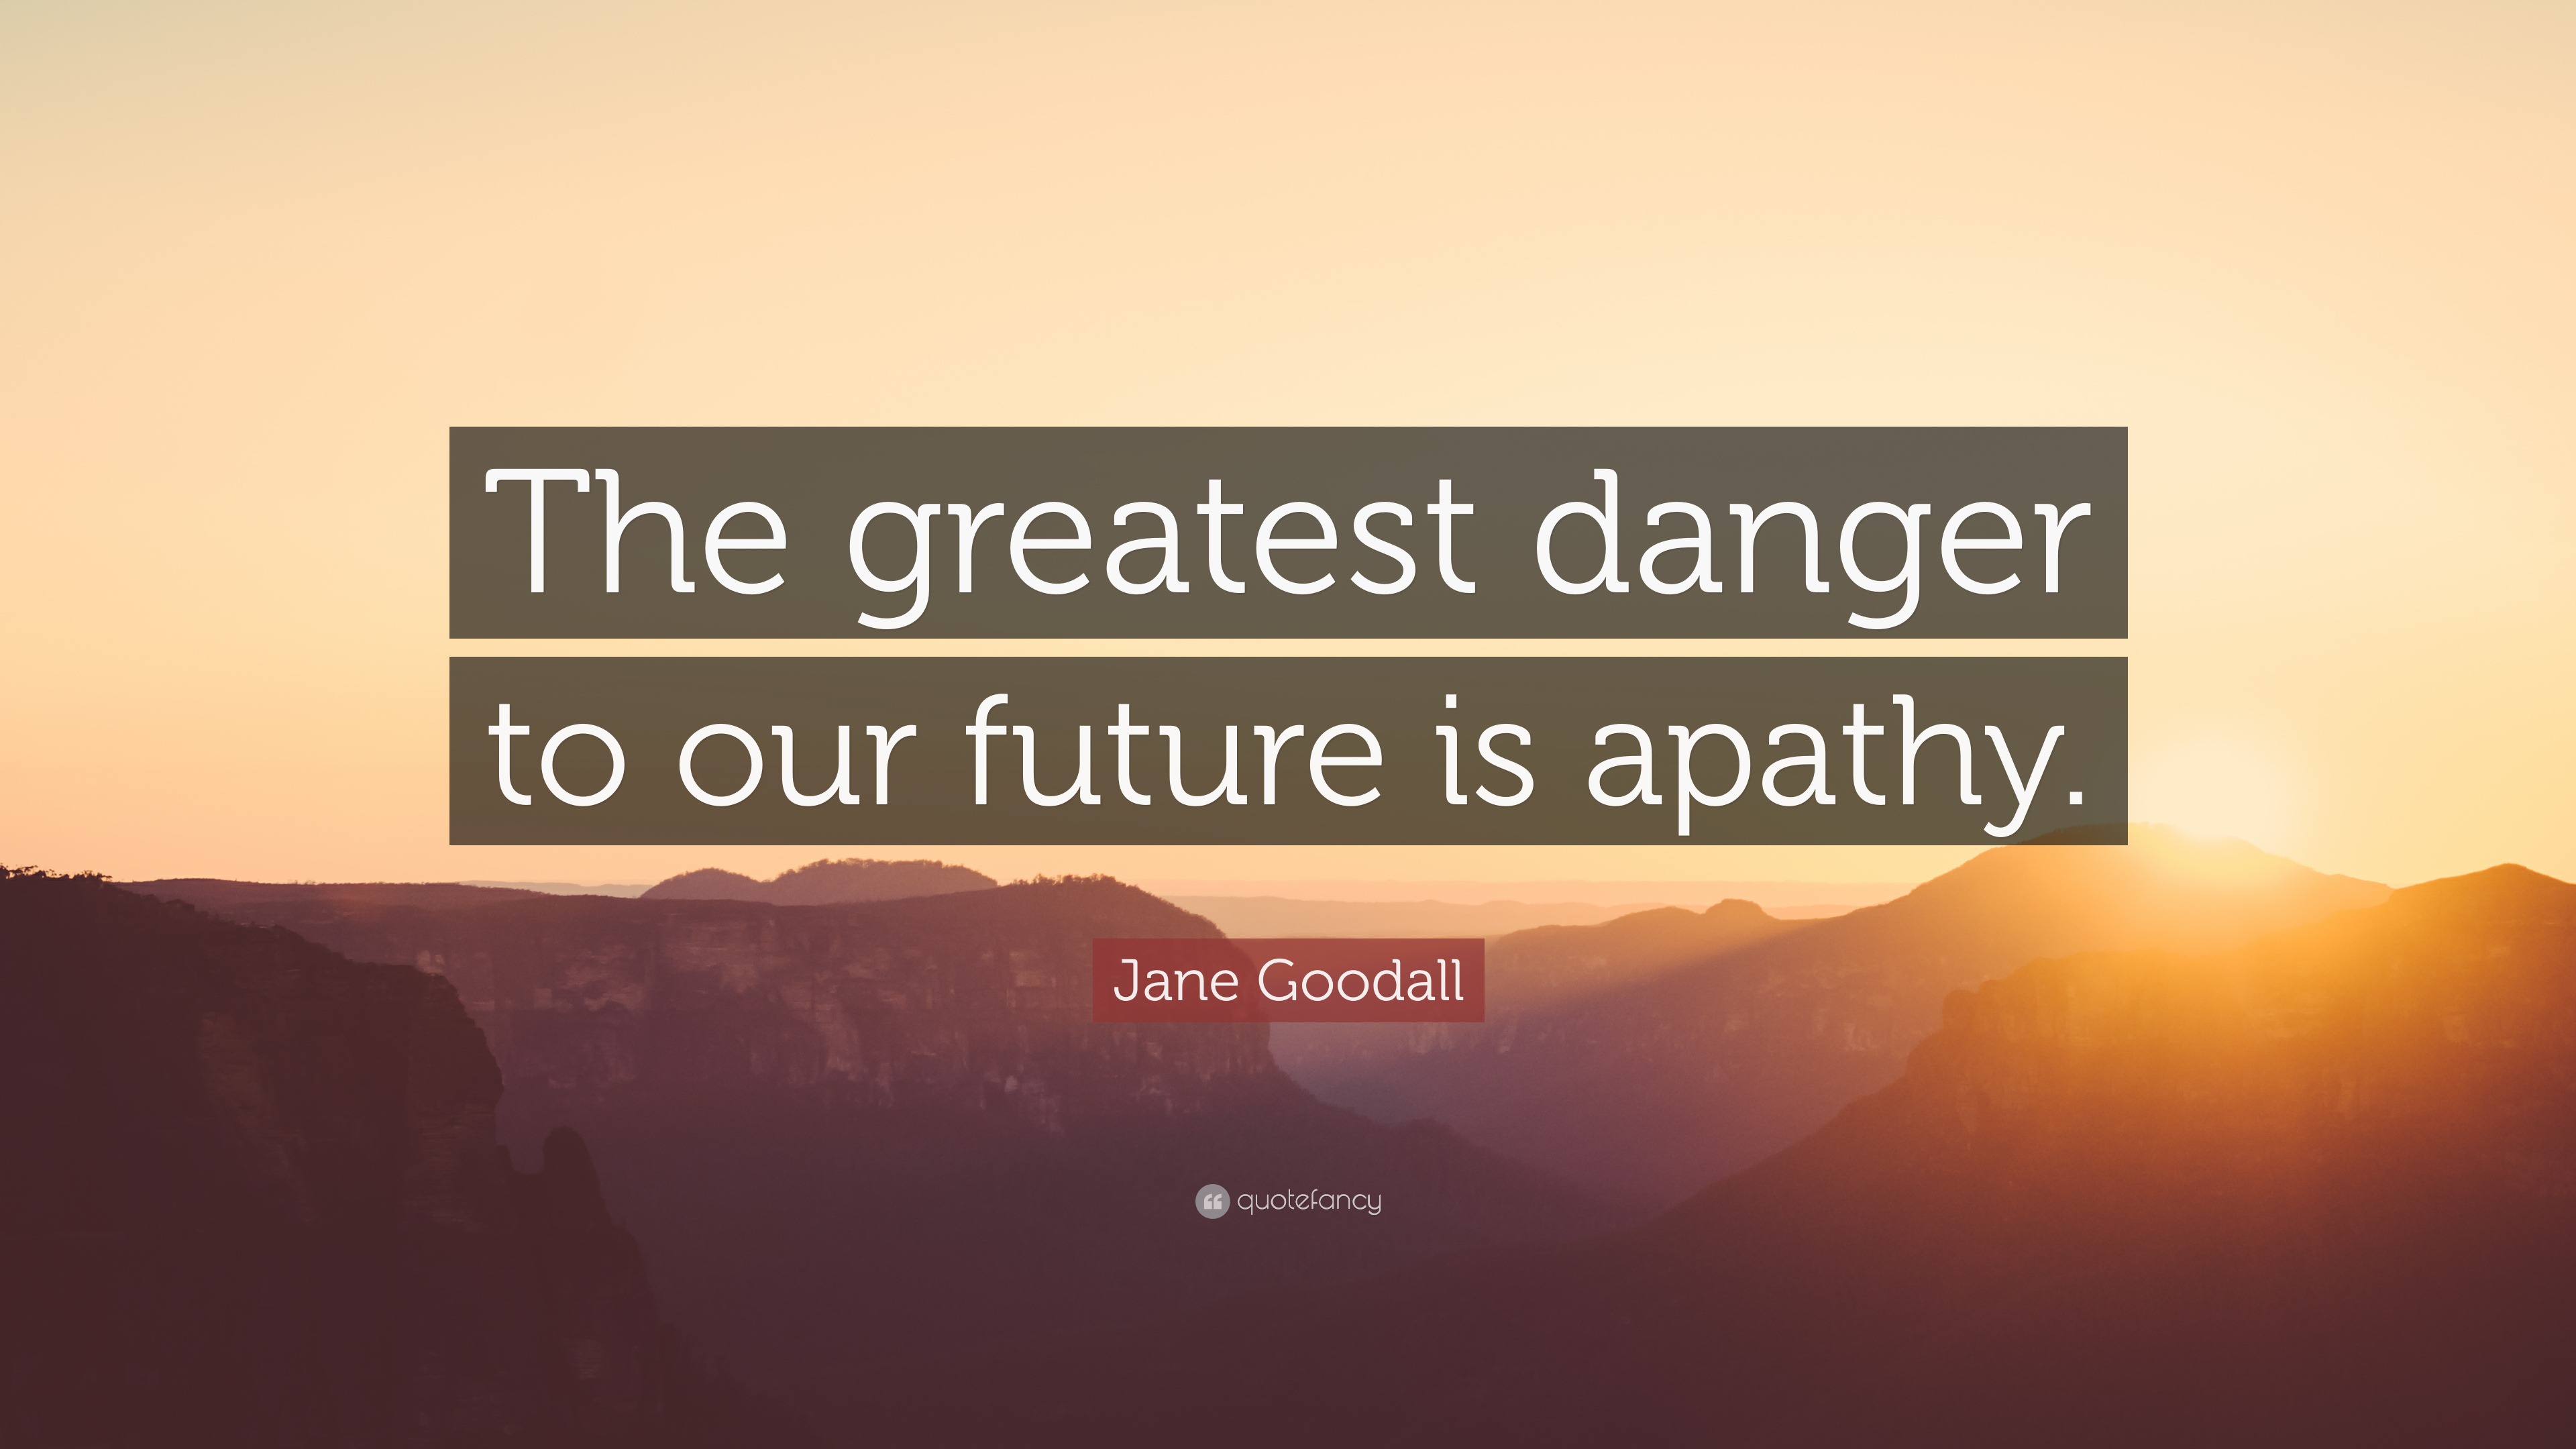 Jane Goodall: The Greatest Threat To Our Future